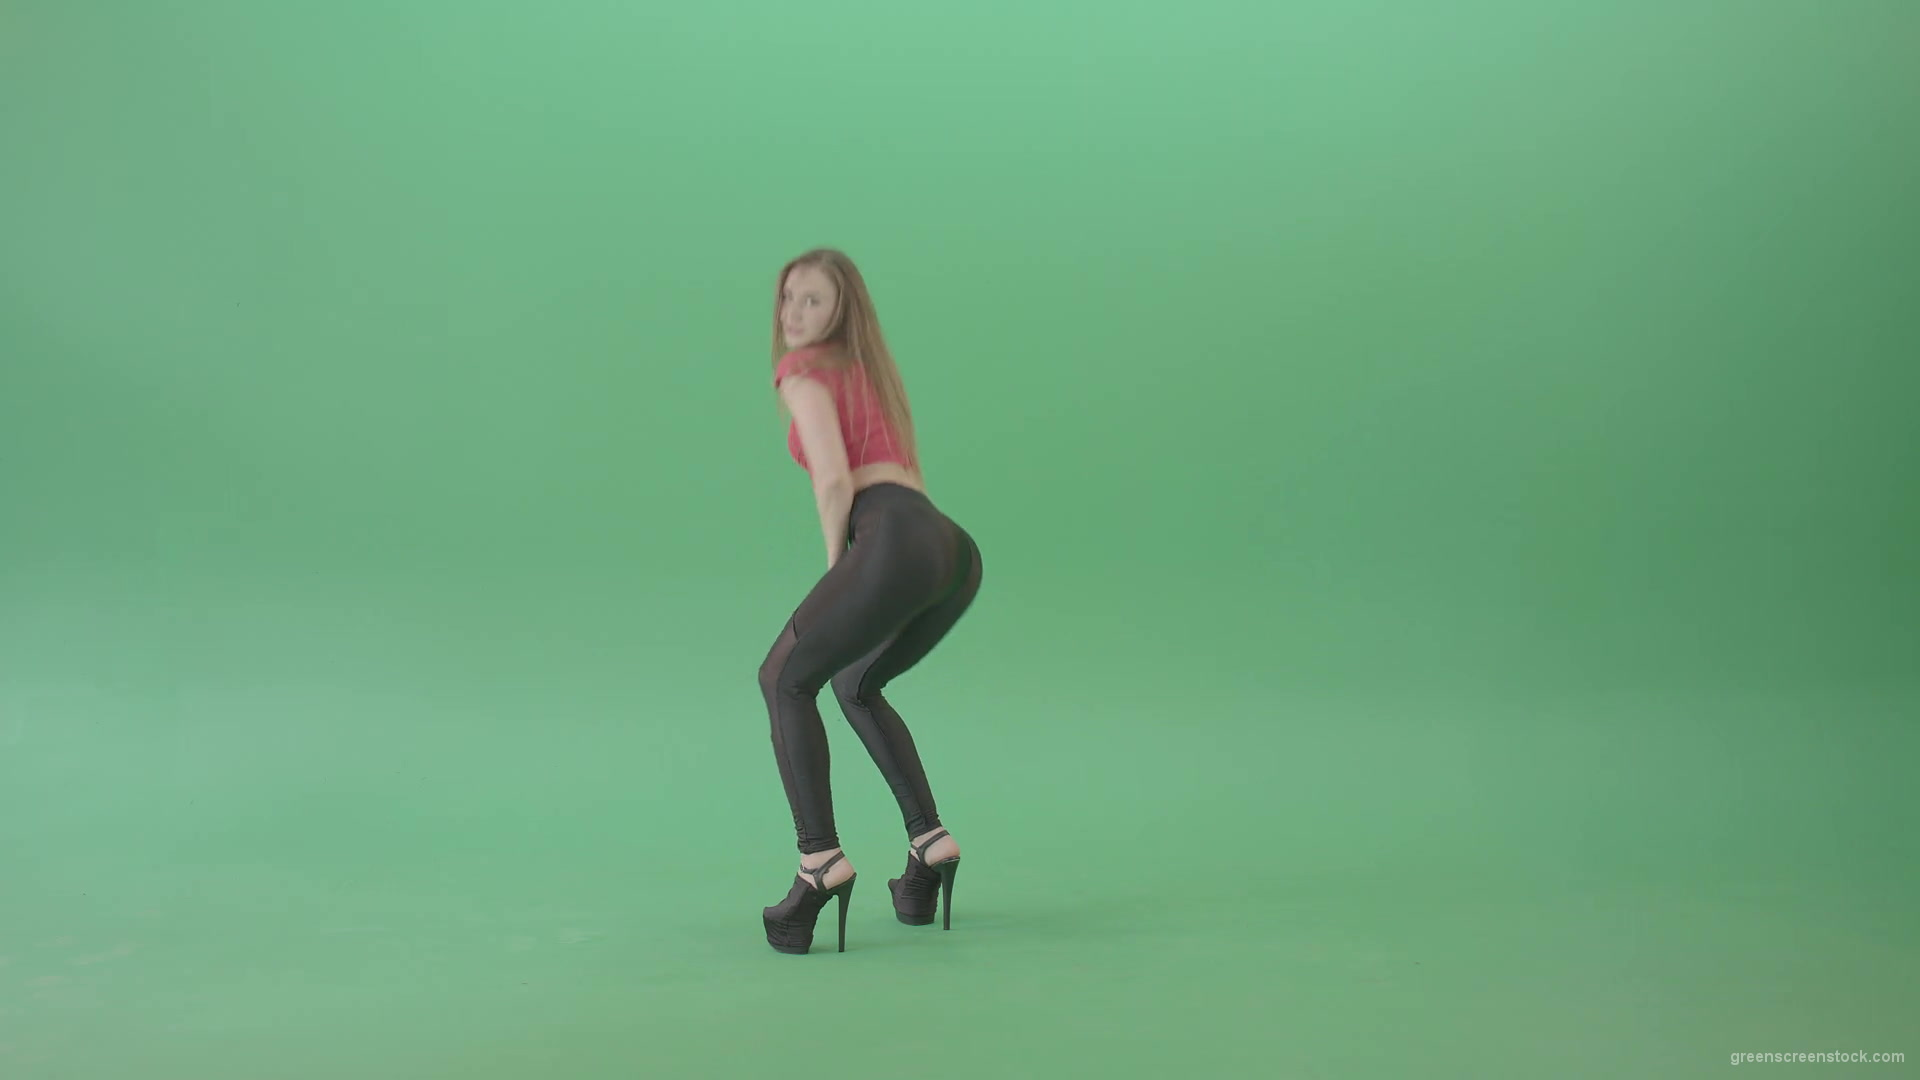 Young-woman-making-squat-on-green-screen-dancing-sexy-moves-4K-Video-Footage-1920_008 Green Screen Stock